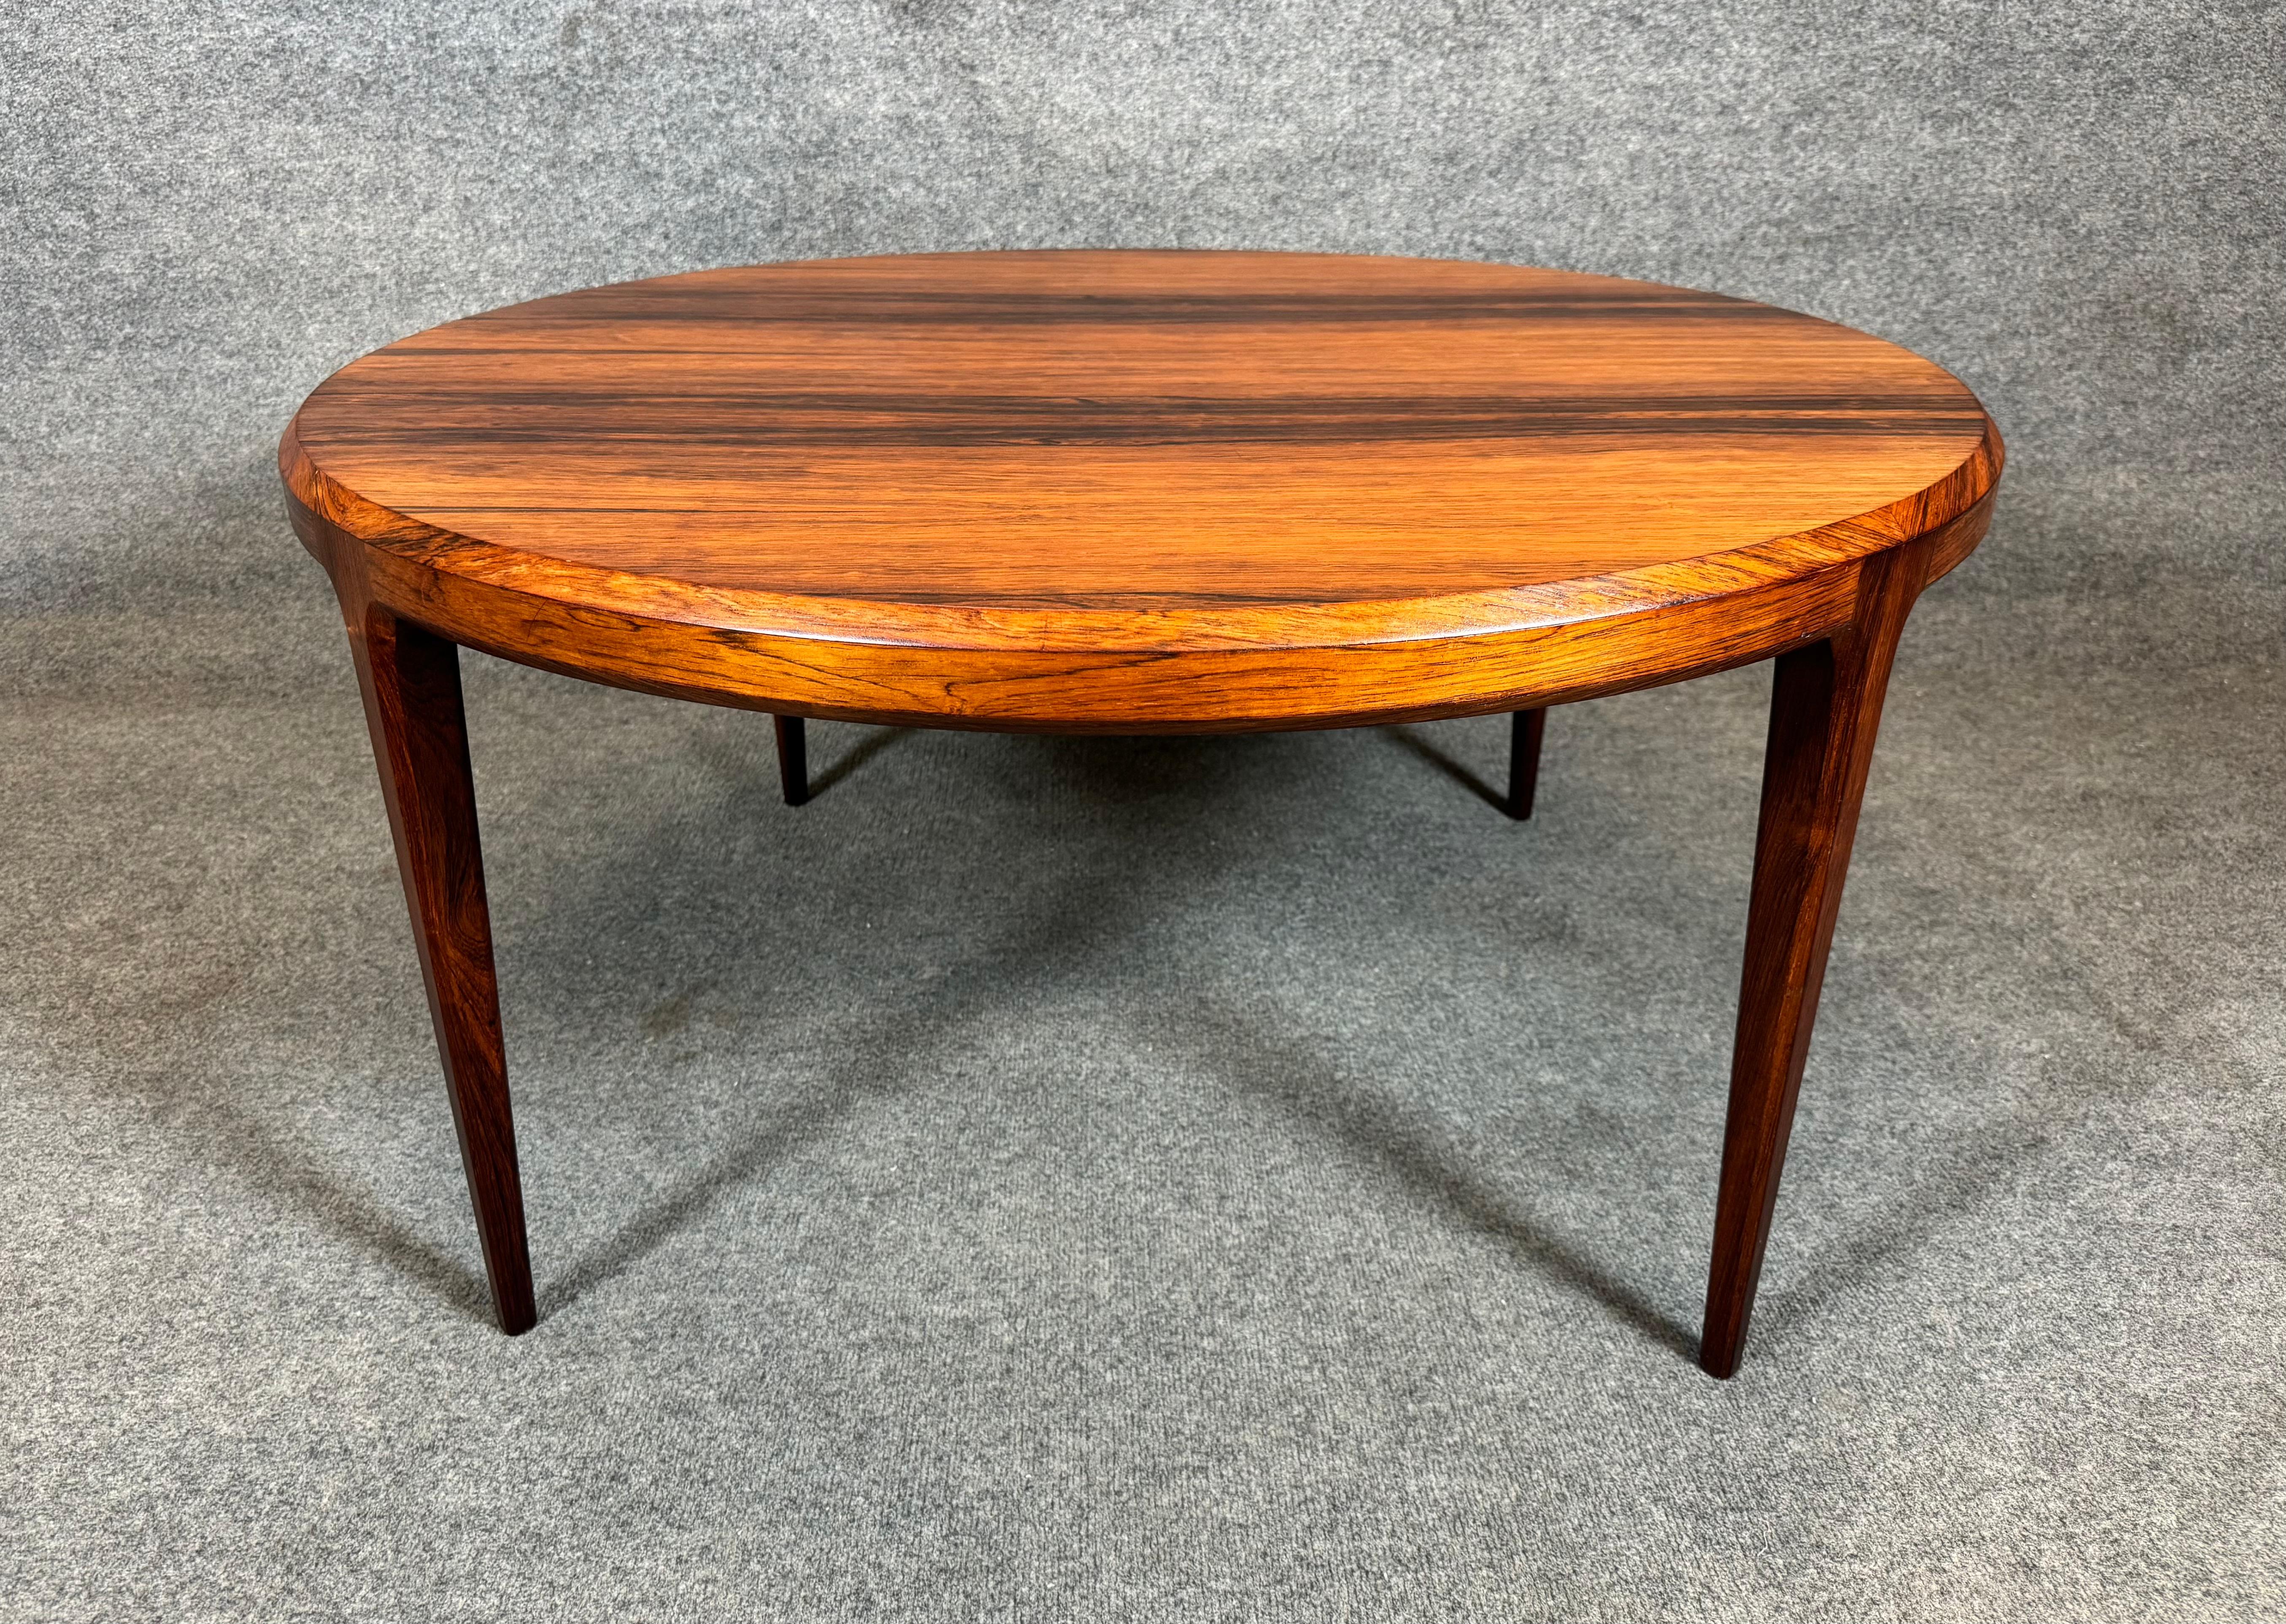 Here is a beautiful Scandinavian modern coffee table in Brazilian rosewood designed by Johannes Andersen and manufactured by CFC Mobelfabrik in Denmark in the 1960's.
This lovely round shaped table, recently imported from Europe to California before